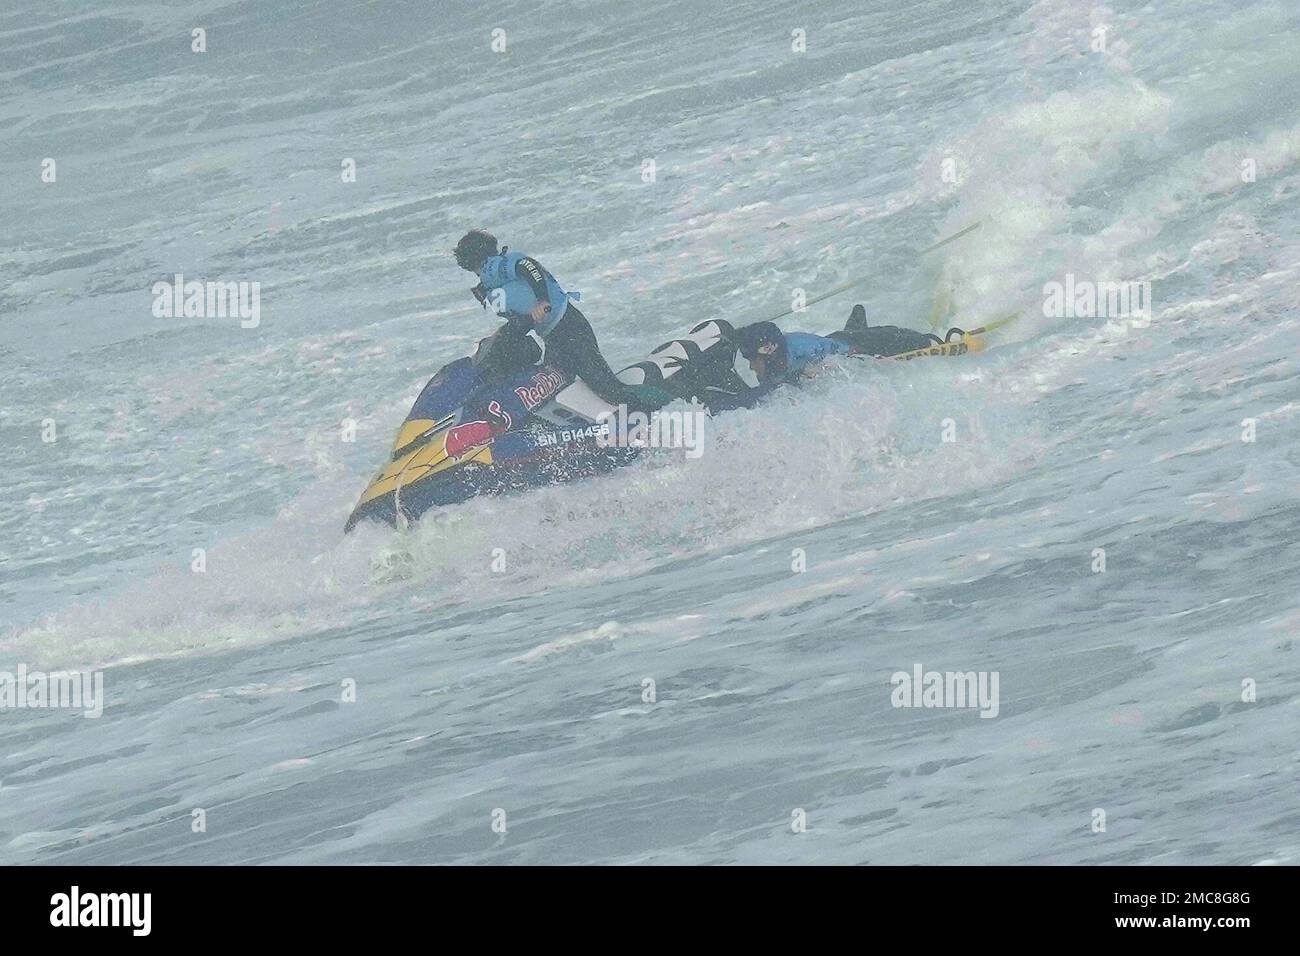 Surfer Justine Dupont from France is rescued by teammate Tony Laureano,  steering the jet ski, after breaking her foot riding a wave during the  Nazare Tow Challenge big wave surfing competition at